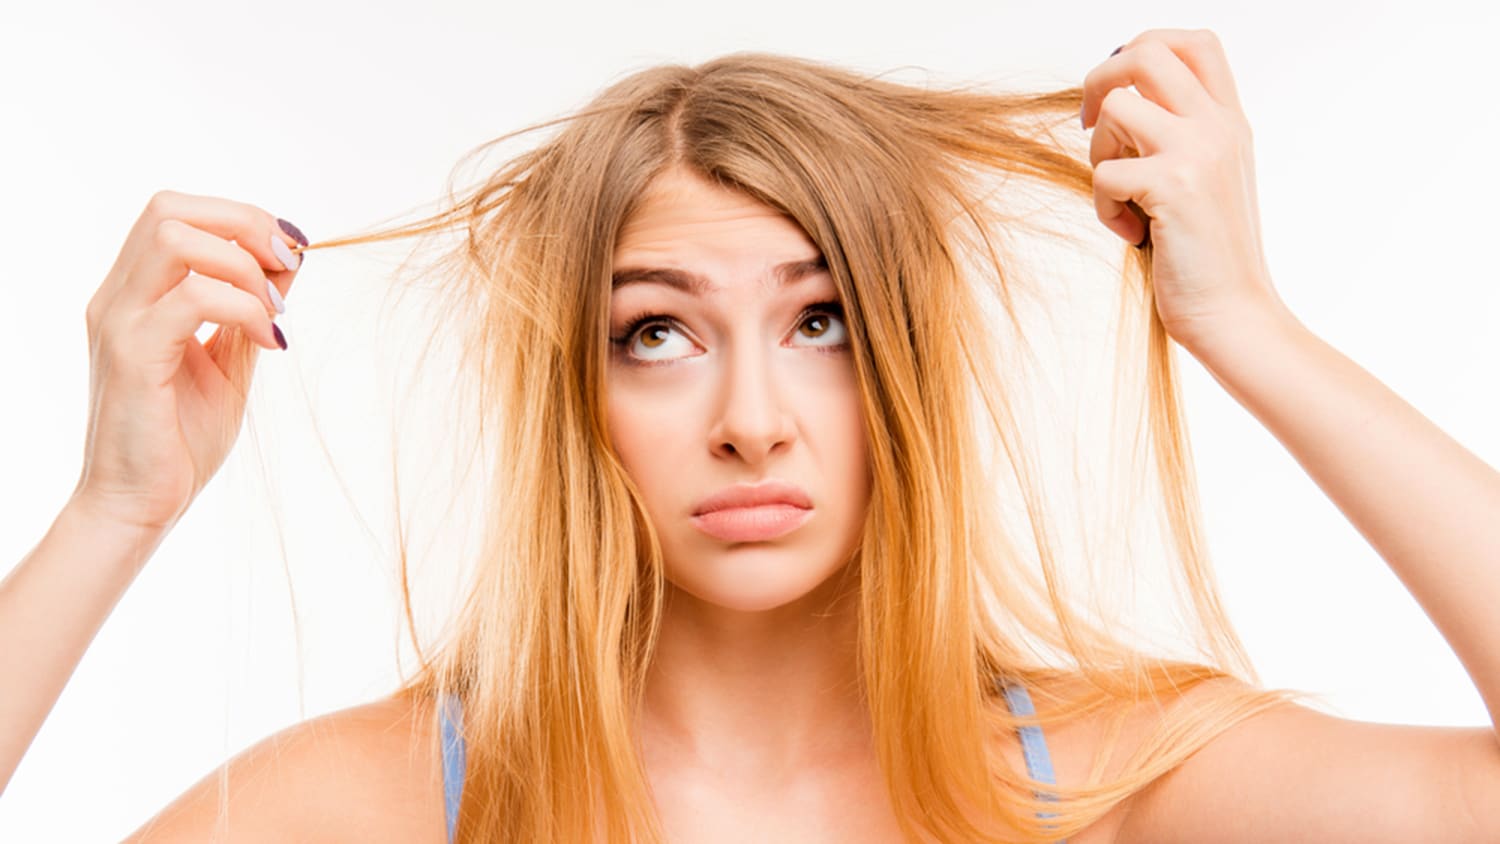 Is dry shampoo bad for your hair?